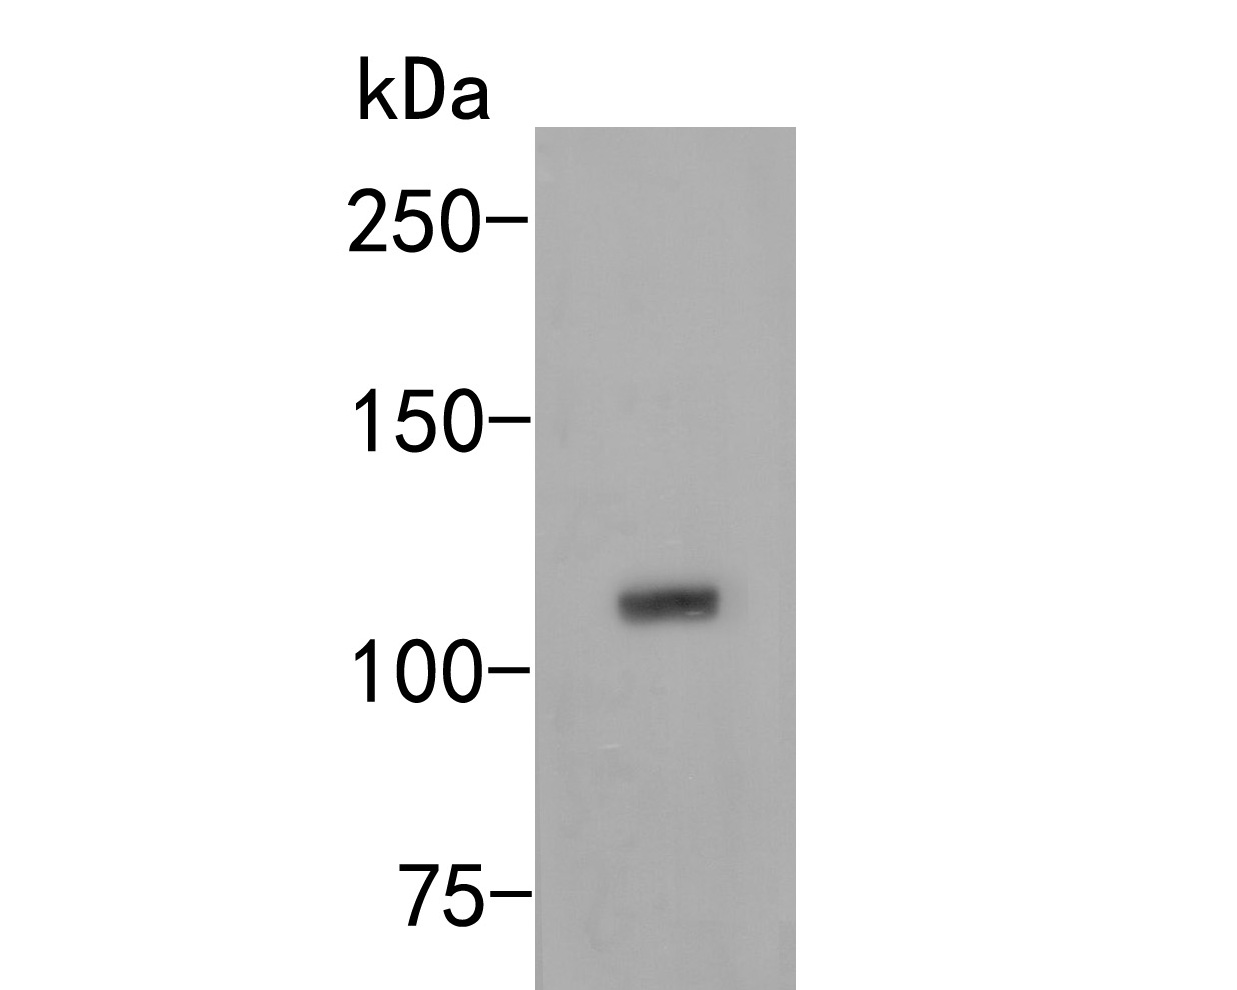 Western blot analysis of EVI1 on A431 cell lysates. Proteins were transferred to a PVDF membrane and blocked with 5% BSA in PBS for 1 hour at room temperature. The primary antibody (HA500173, 1/500) was used in 5% BSA at room temperature for 2 hours. Goat Anti-Rabbit IgG - HRP Secondary Antibody (HA1001) at 1:5,000 dilution was used for 1 hour at room temperature.